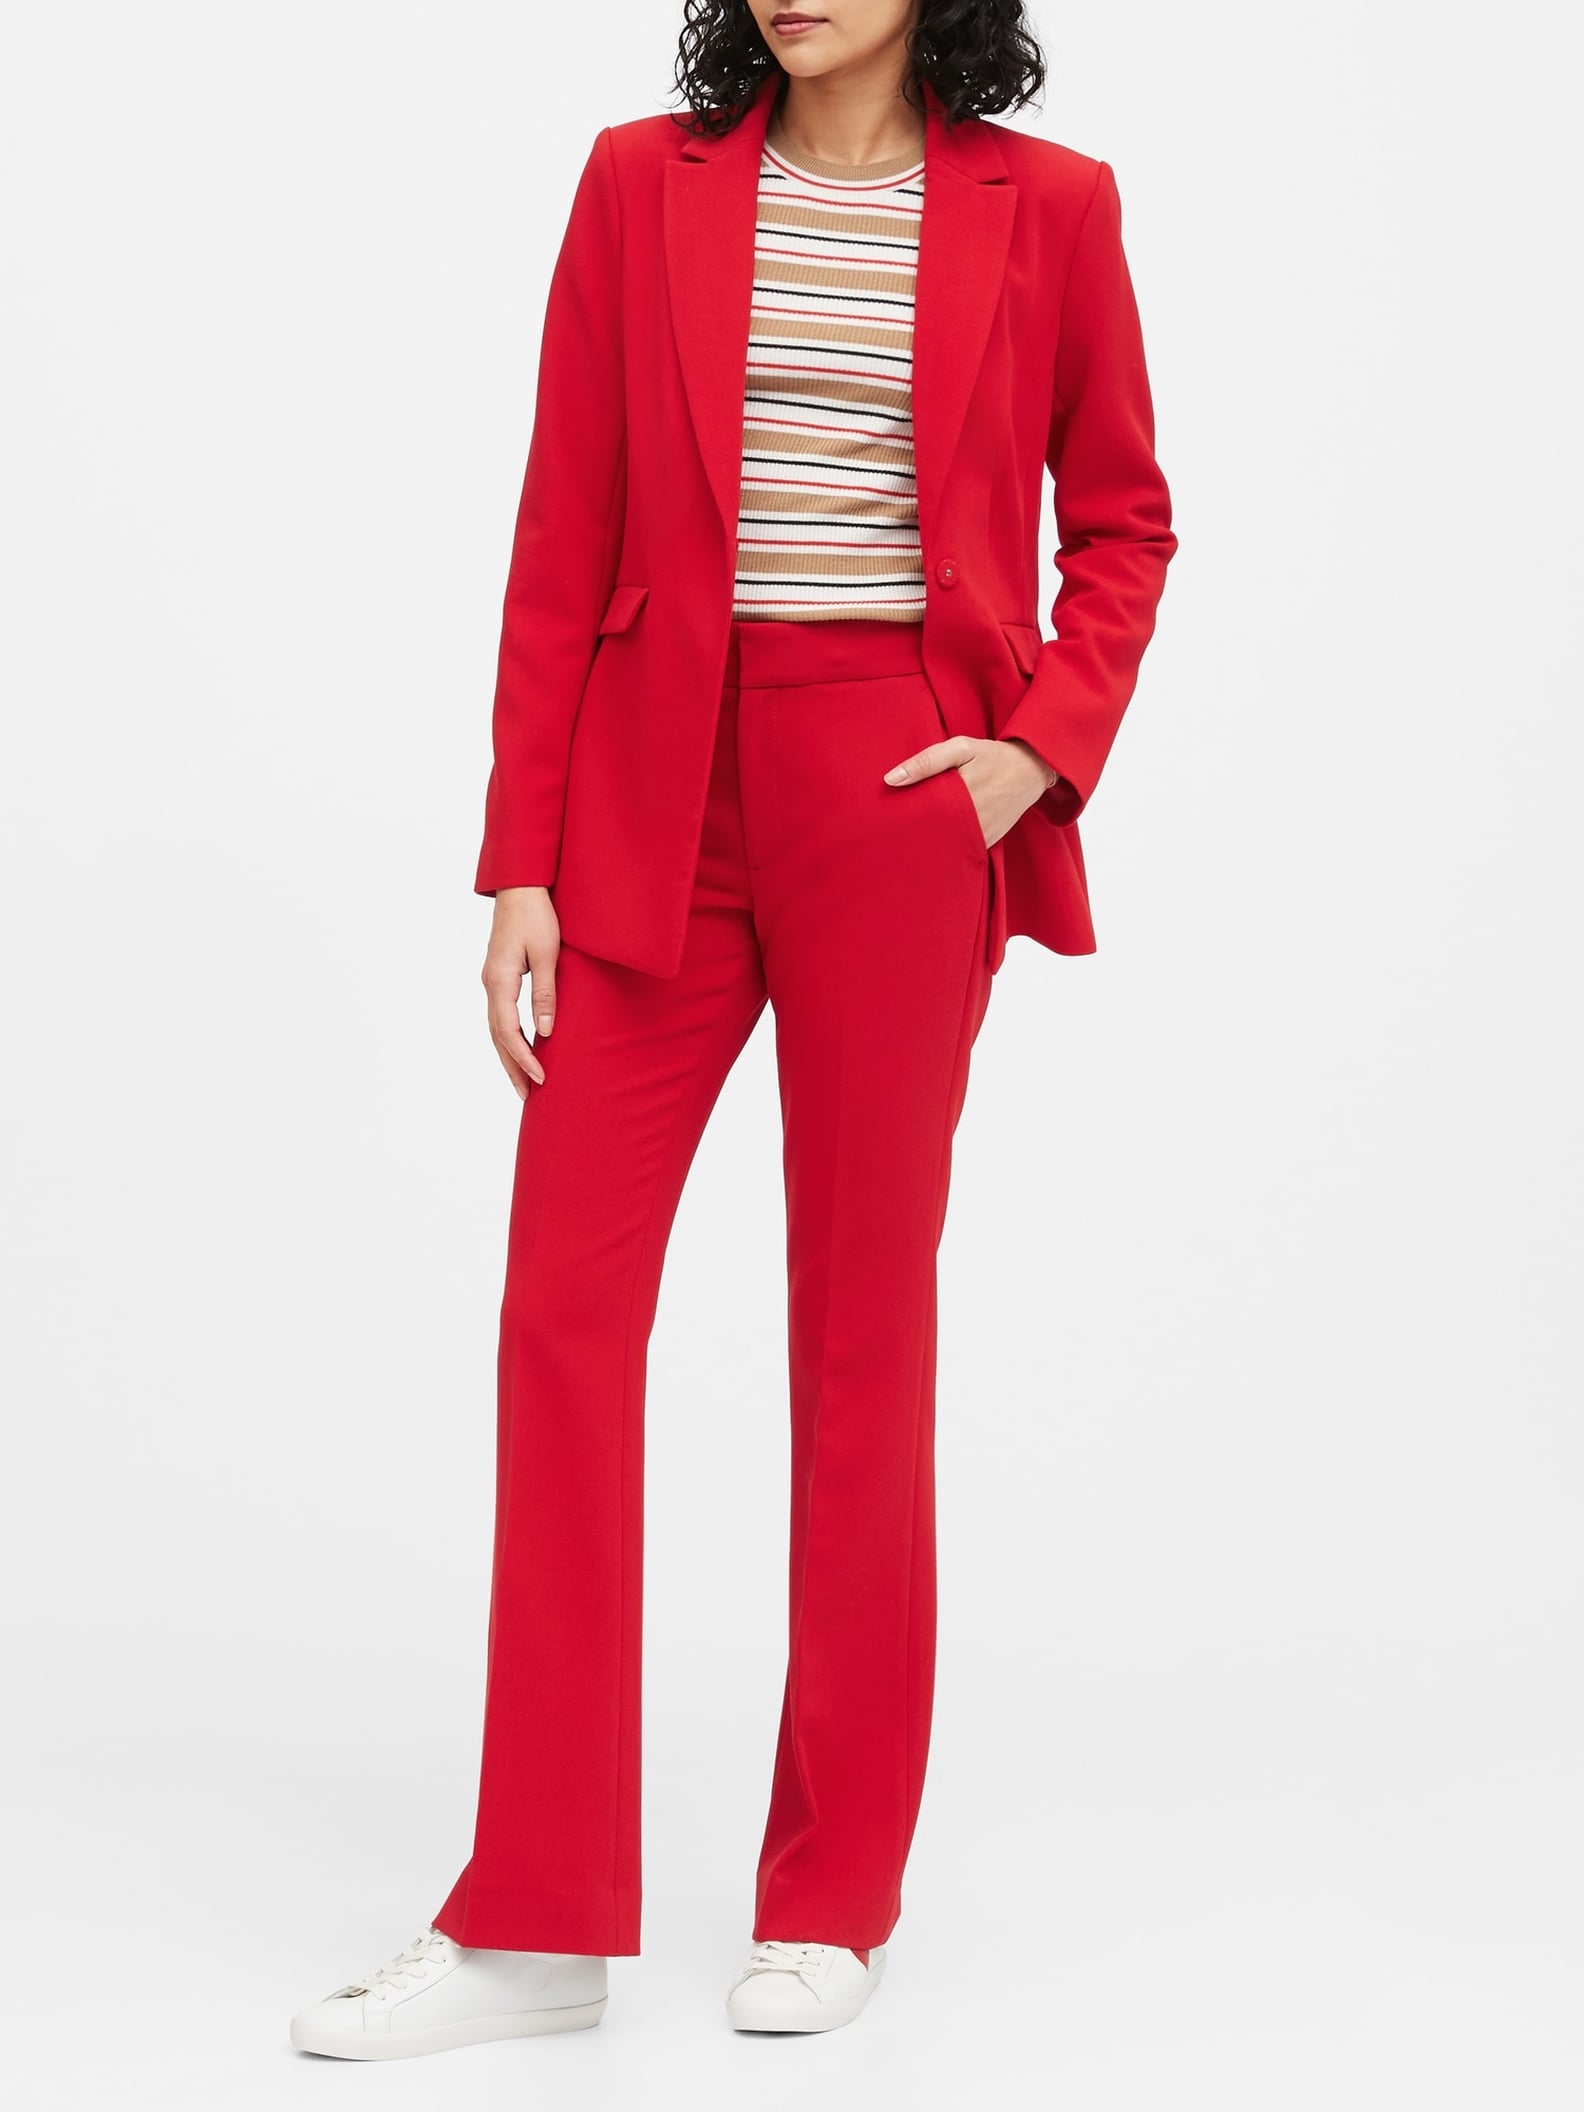 Best Banana Republic Clothes and Accessories February 2020 | POPSUGAR ...